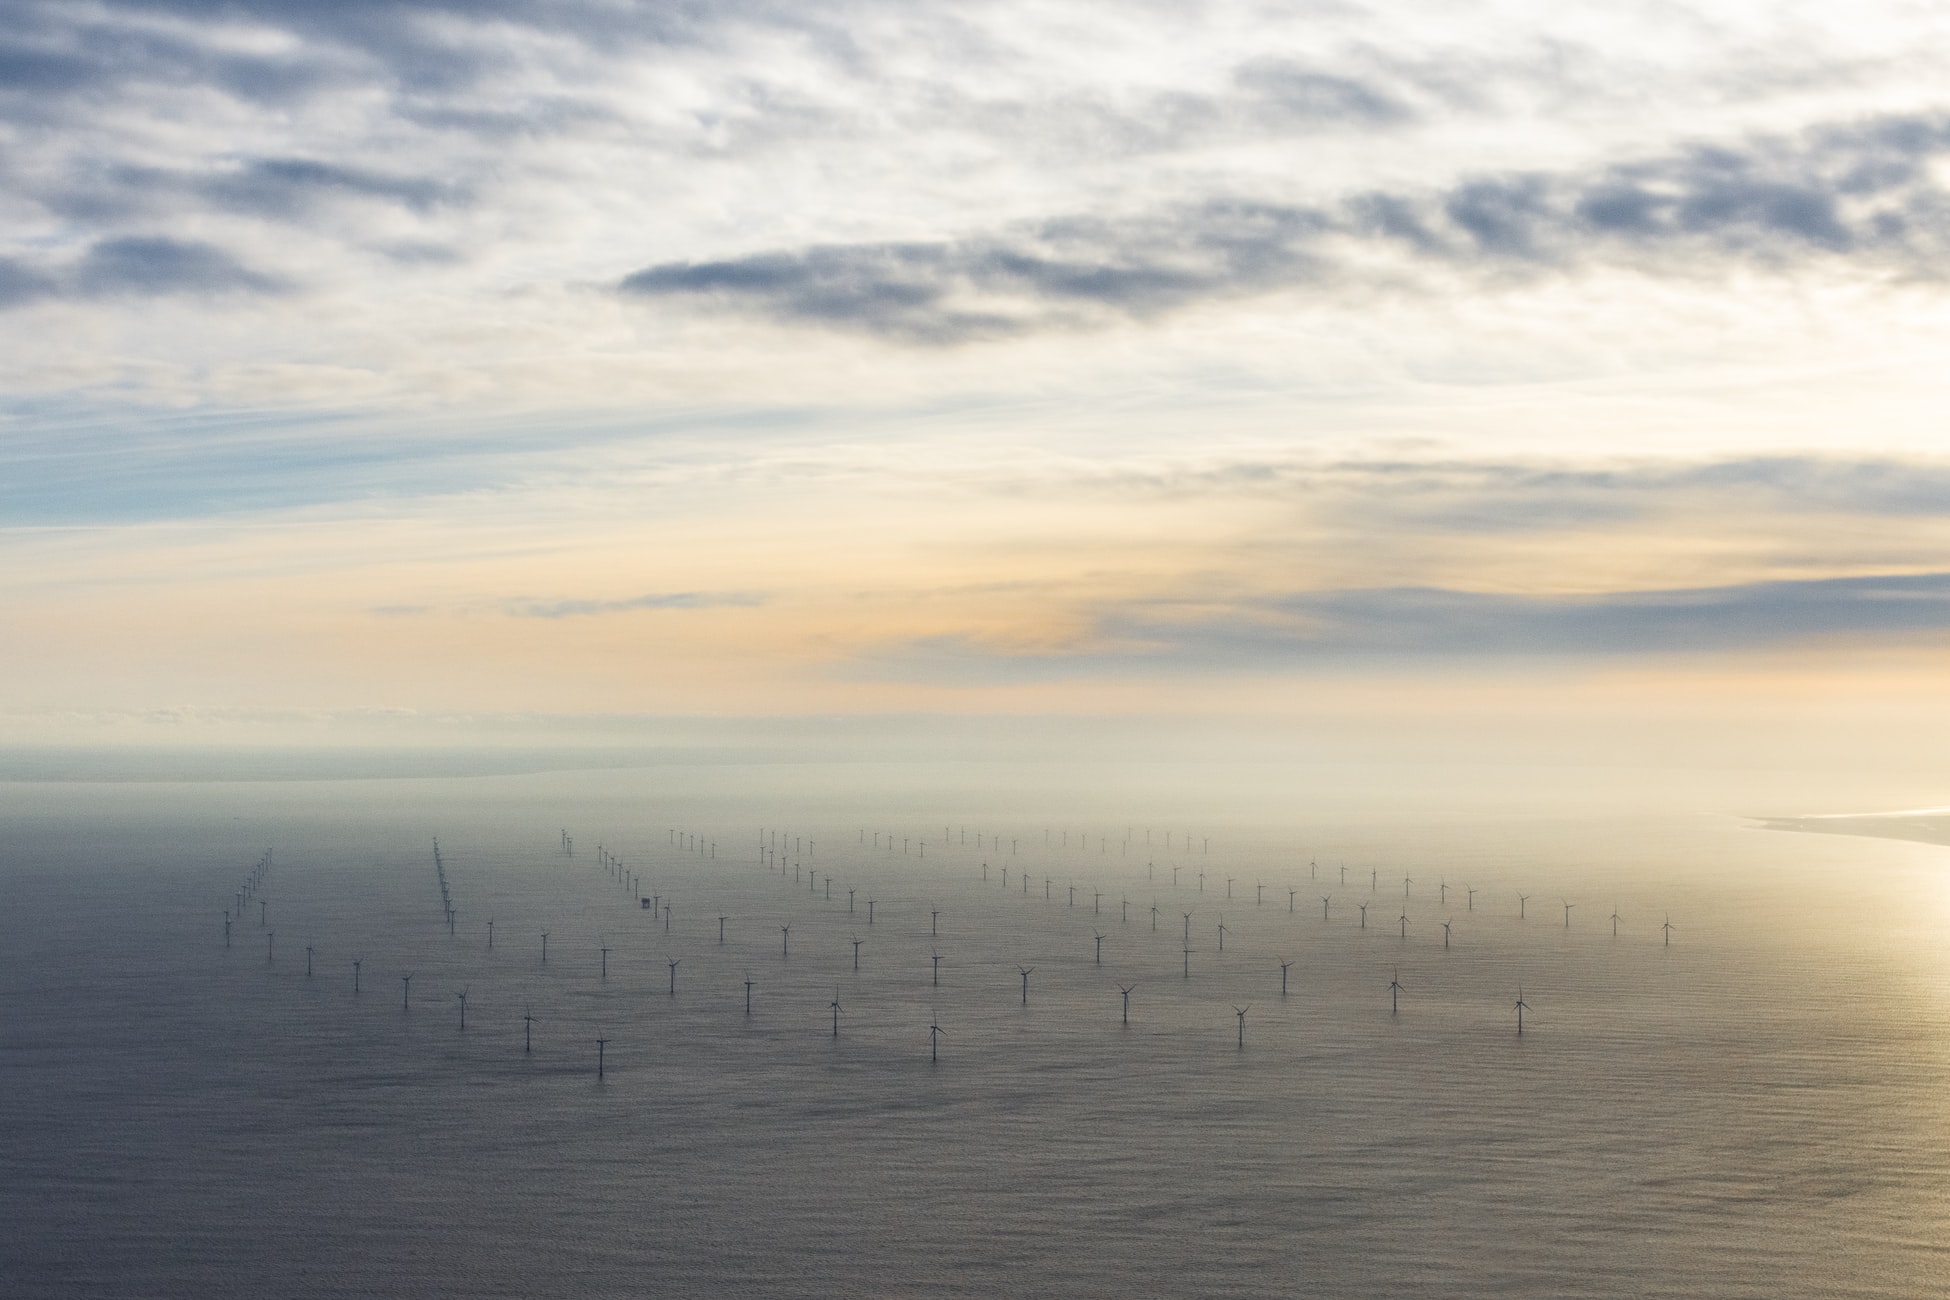 The success of UK offshore windfarms, which are now primarily built in the Dogger Bank region of the North Sea, also means the UK has considerable skills and expertise than can be exported around the world.